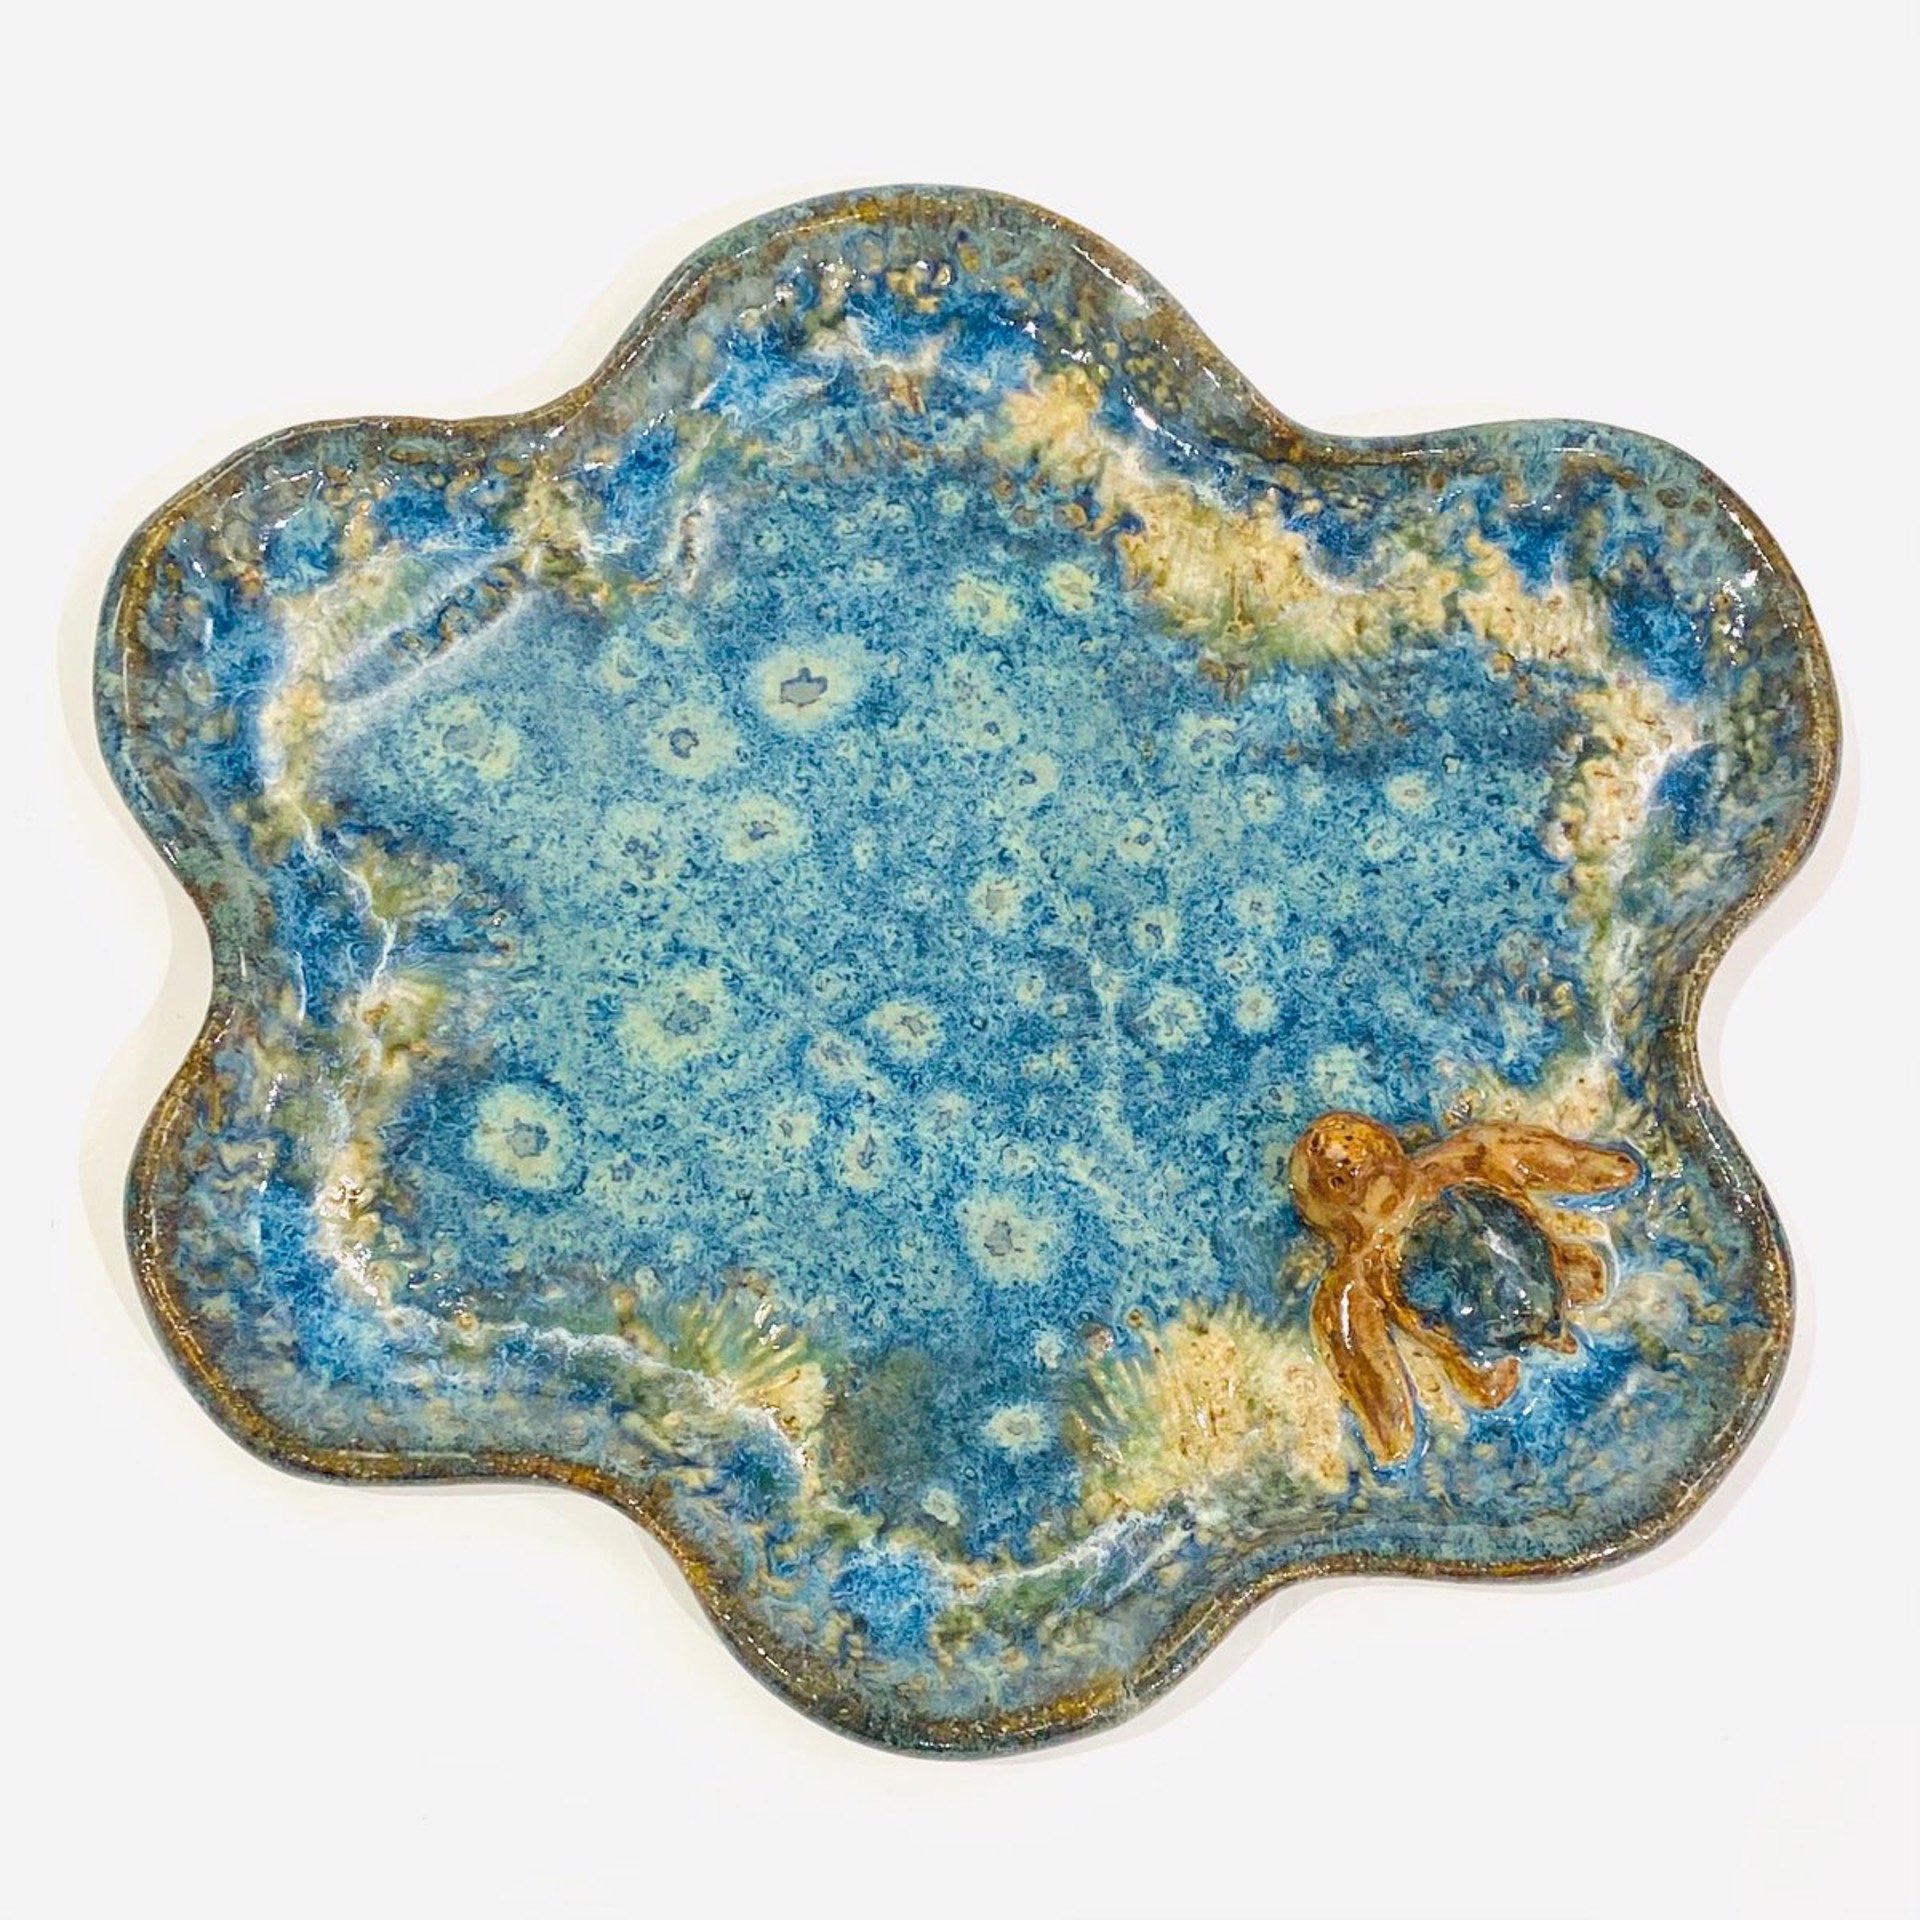 LG22-917 Small Plate with Turtle (Blue Glaze) by Jim & Steffi Logan